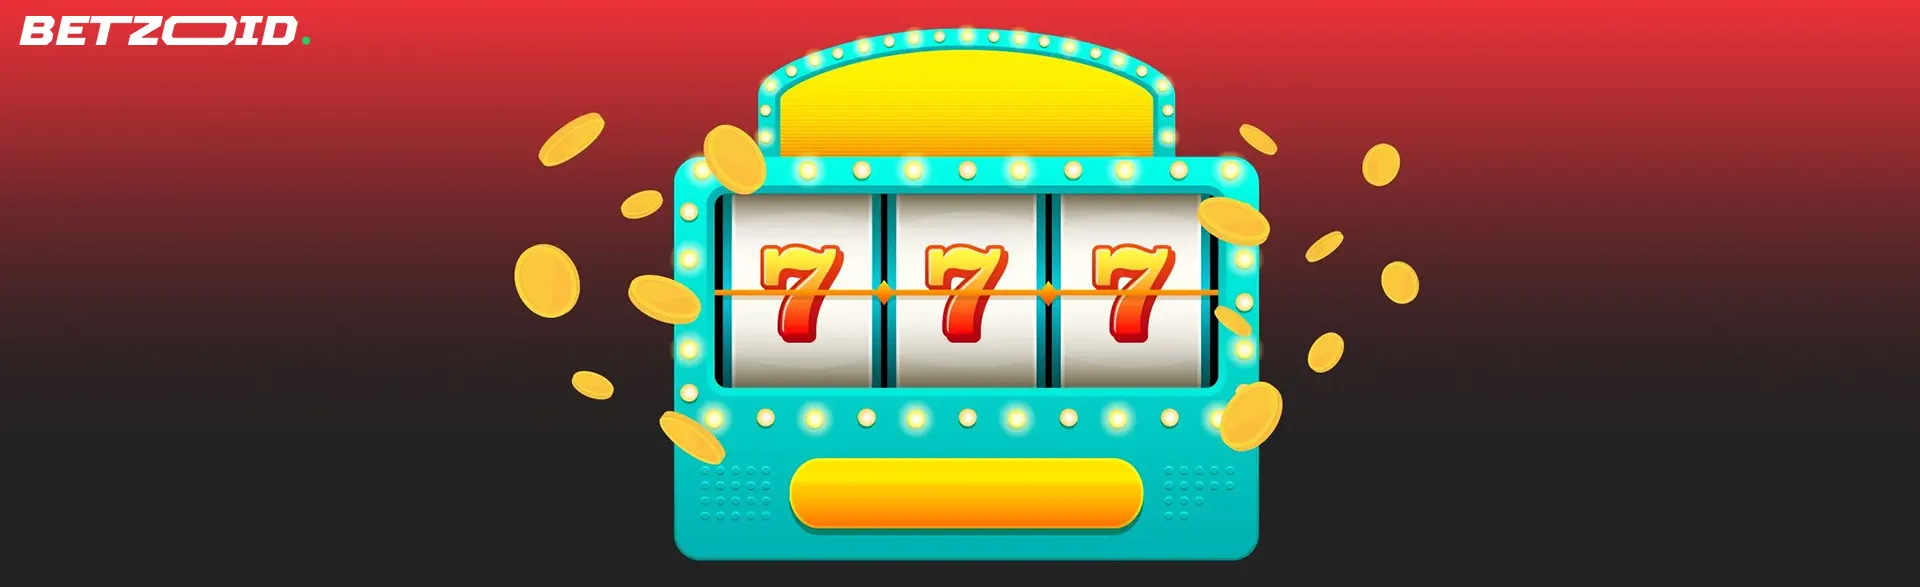 Free spins with no deposit on Canadian casino slot machine.